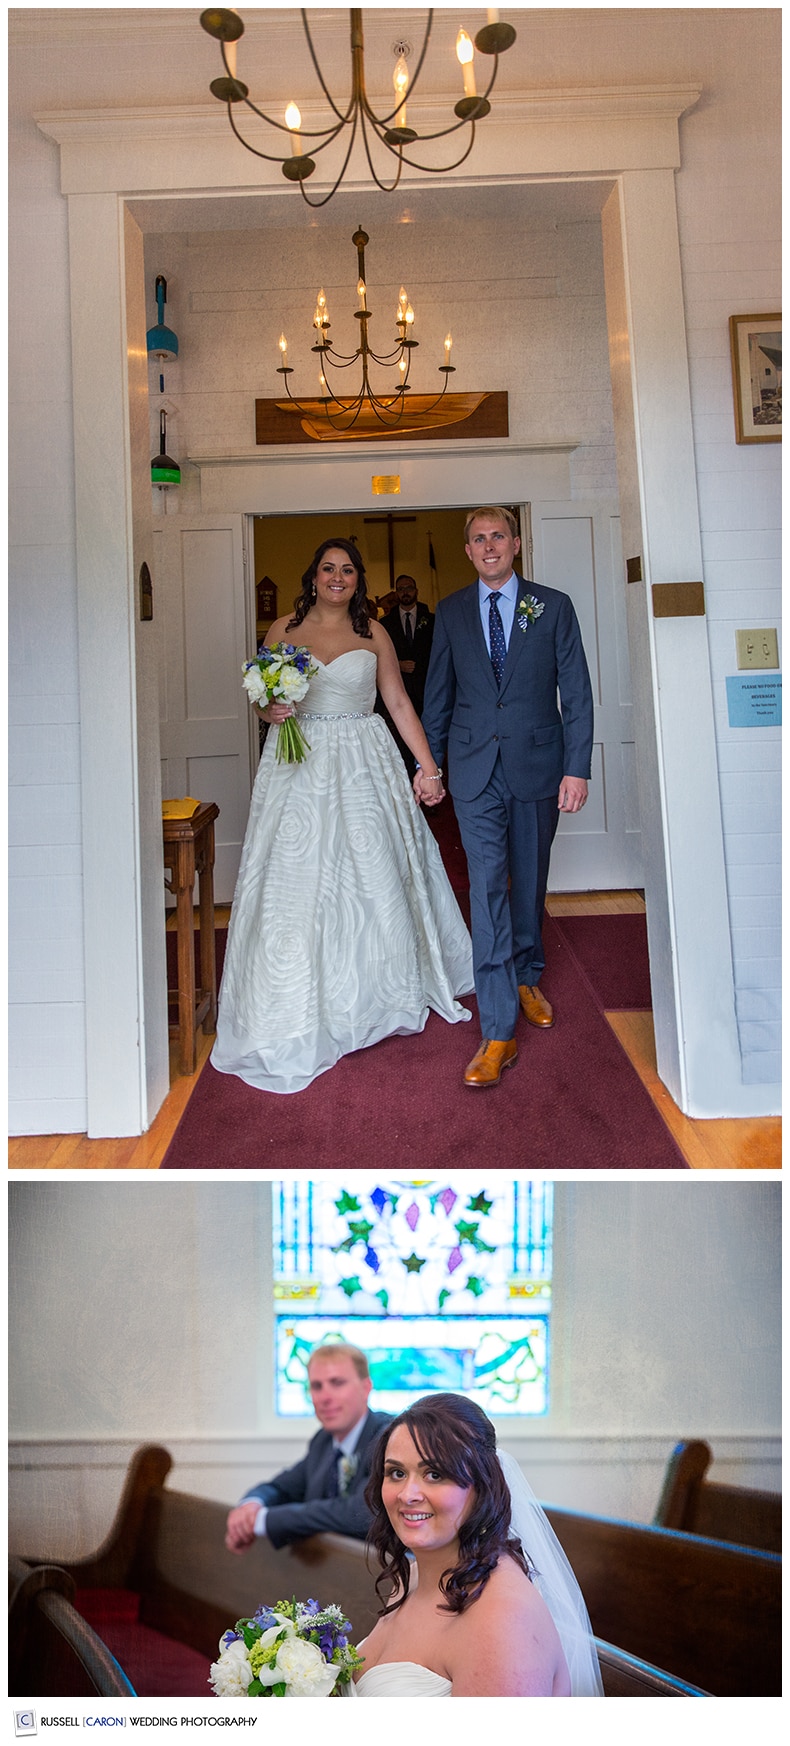 Bride and groom during wedding recessional, bride and groom in church